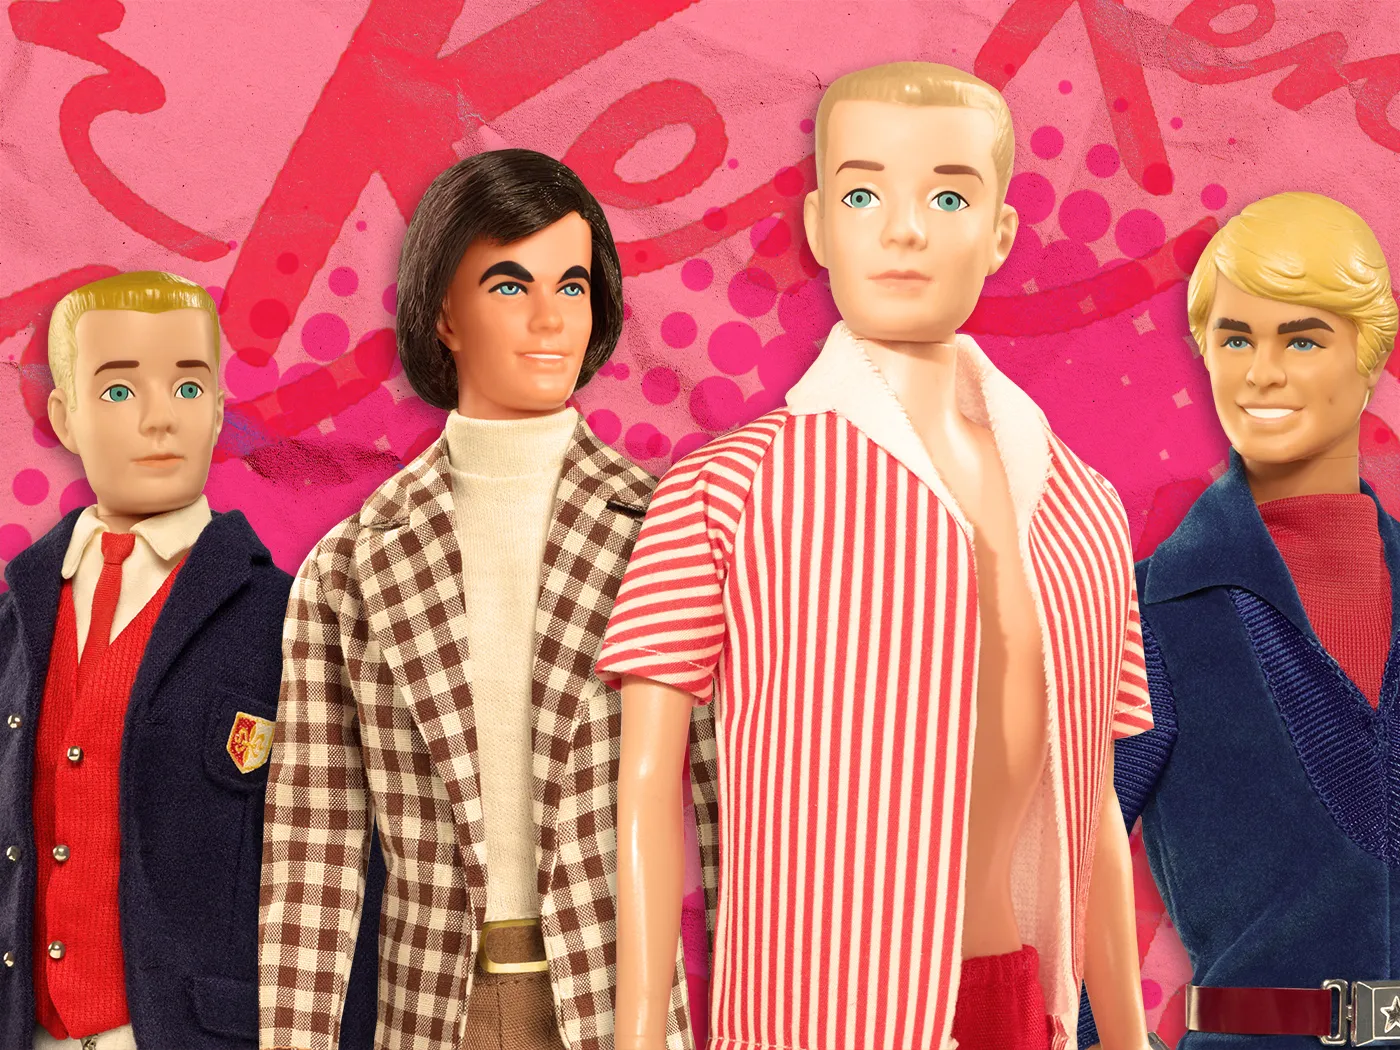 Barbie: A brief history of the doll through the ages